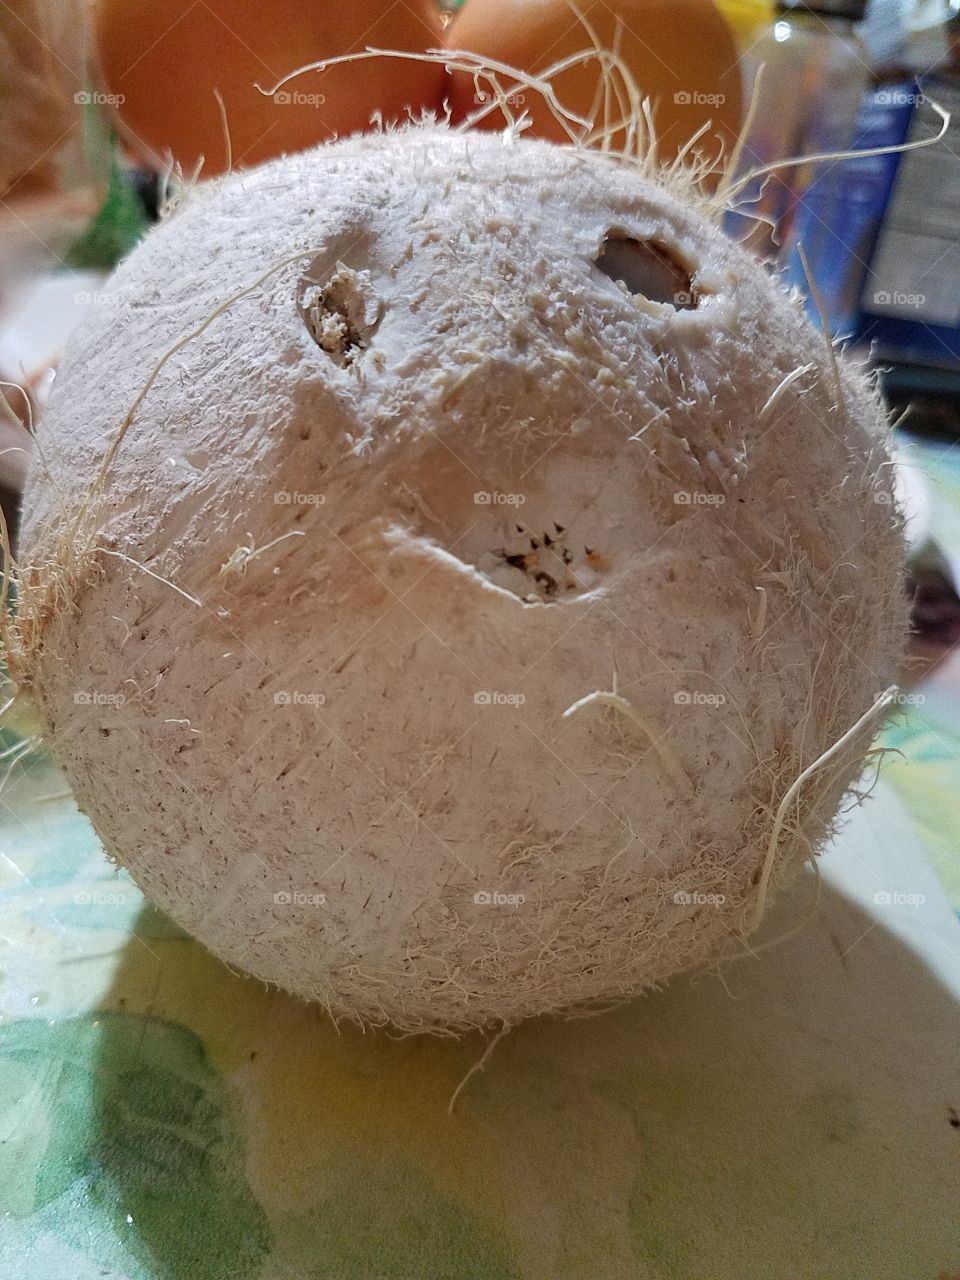 Coconuts say "wow" too!!!